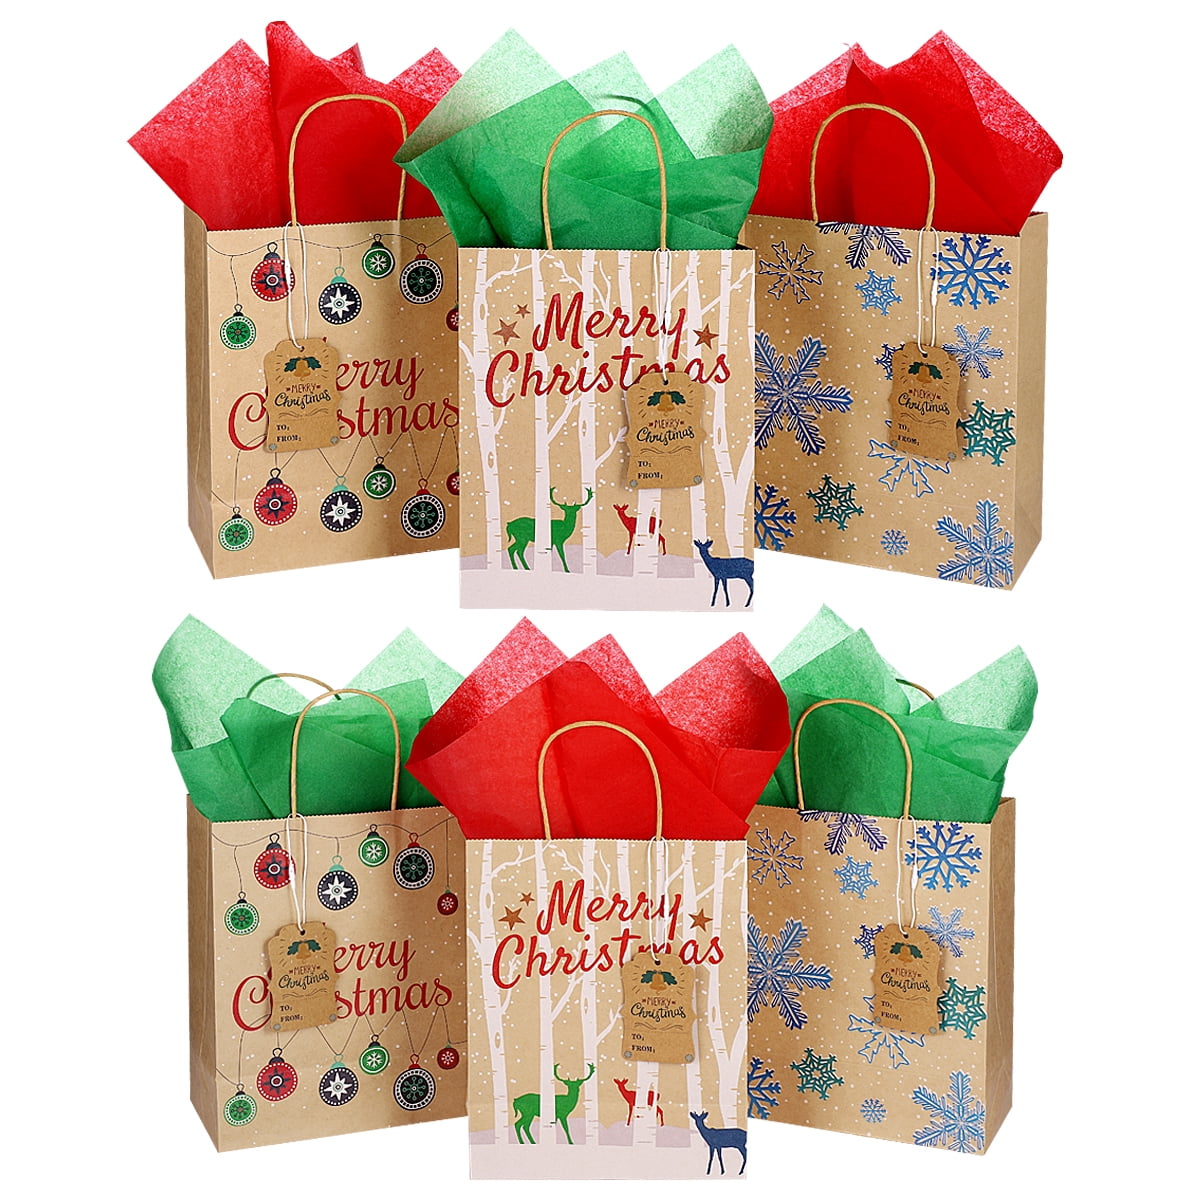 Uptotop Christmas Gift Bags 18 Pack Double-sided Design Christmas Paper Bags with 6 Different Patterns Xmas Kraft Bags for Holiday Party 